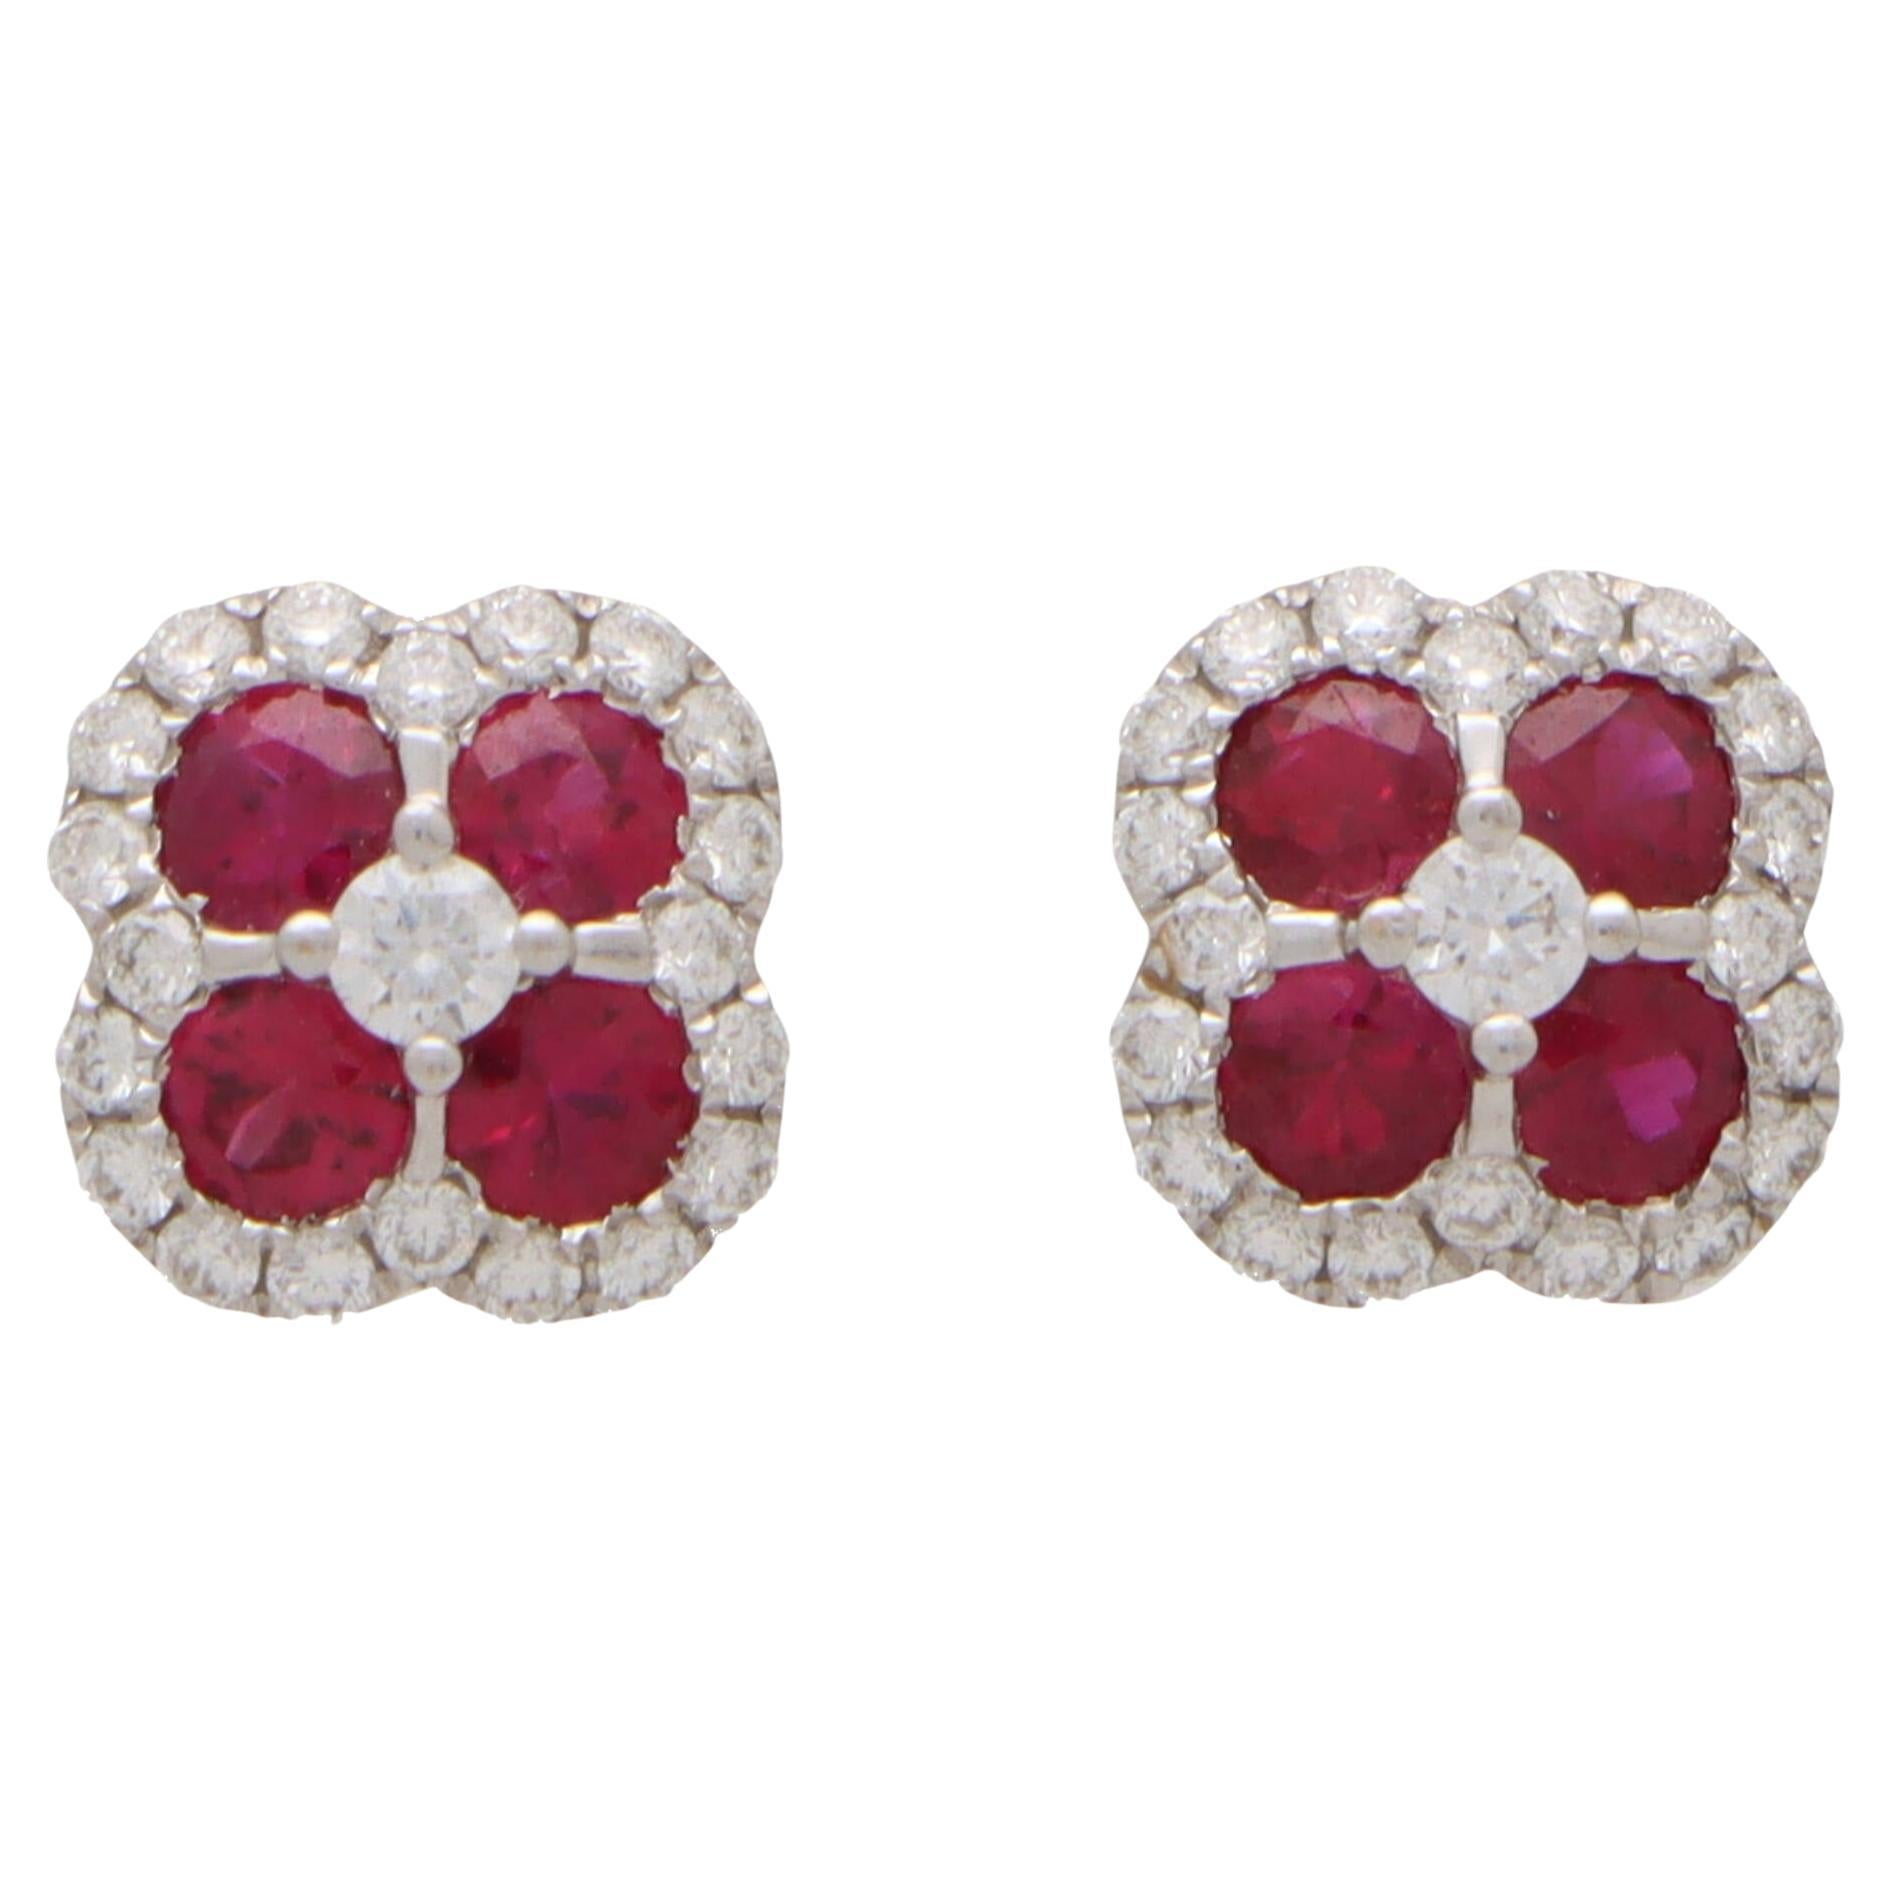 Ruby and Diamond Haloed Floral Cluster Earrings Set in 18k White Gold